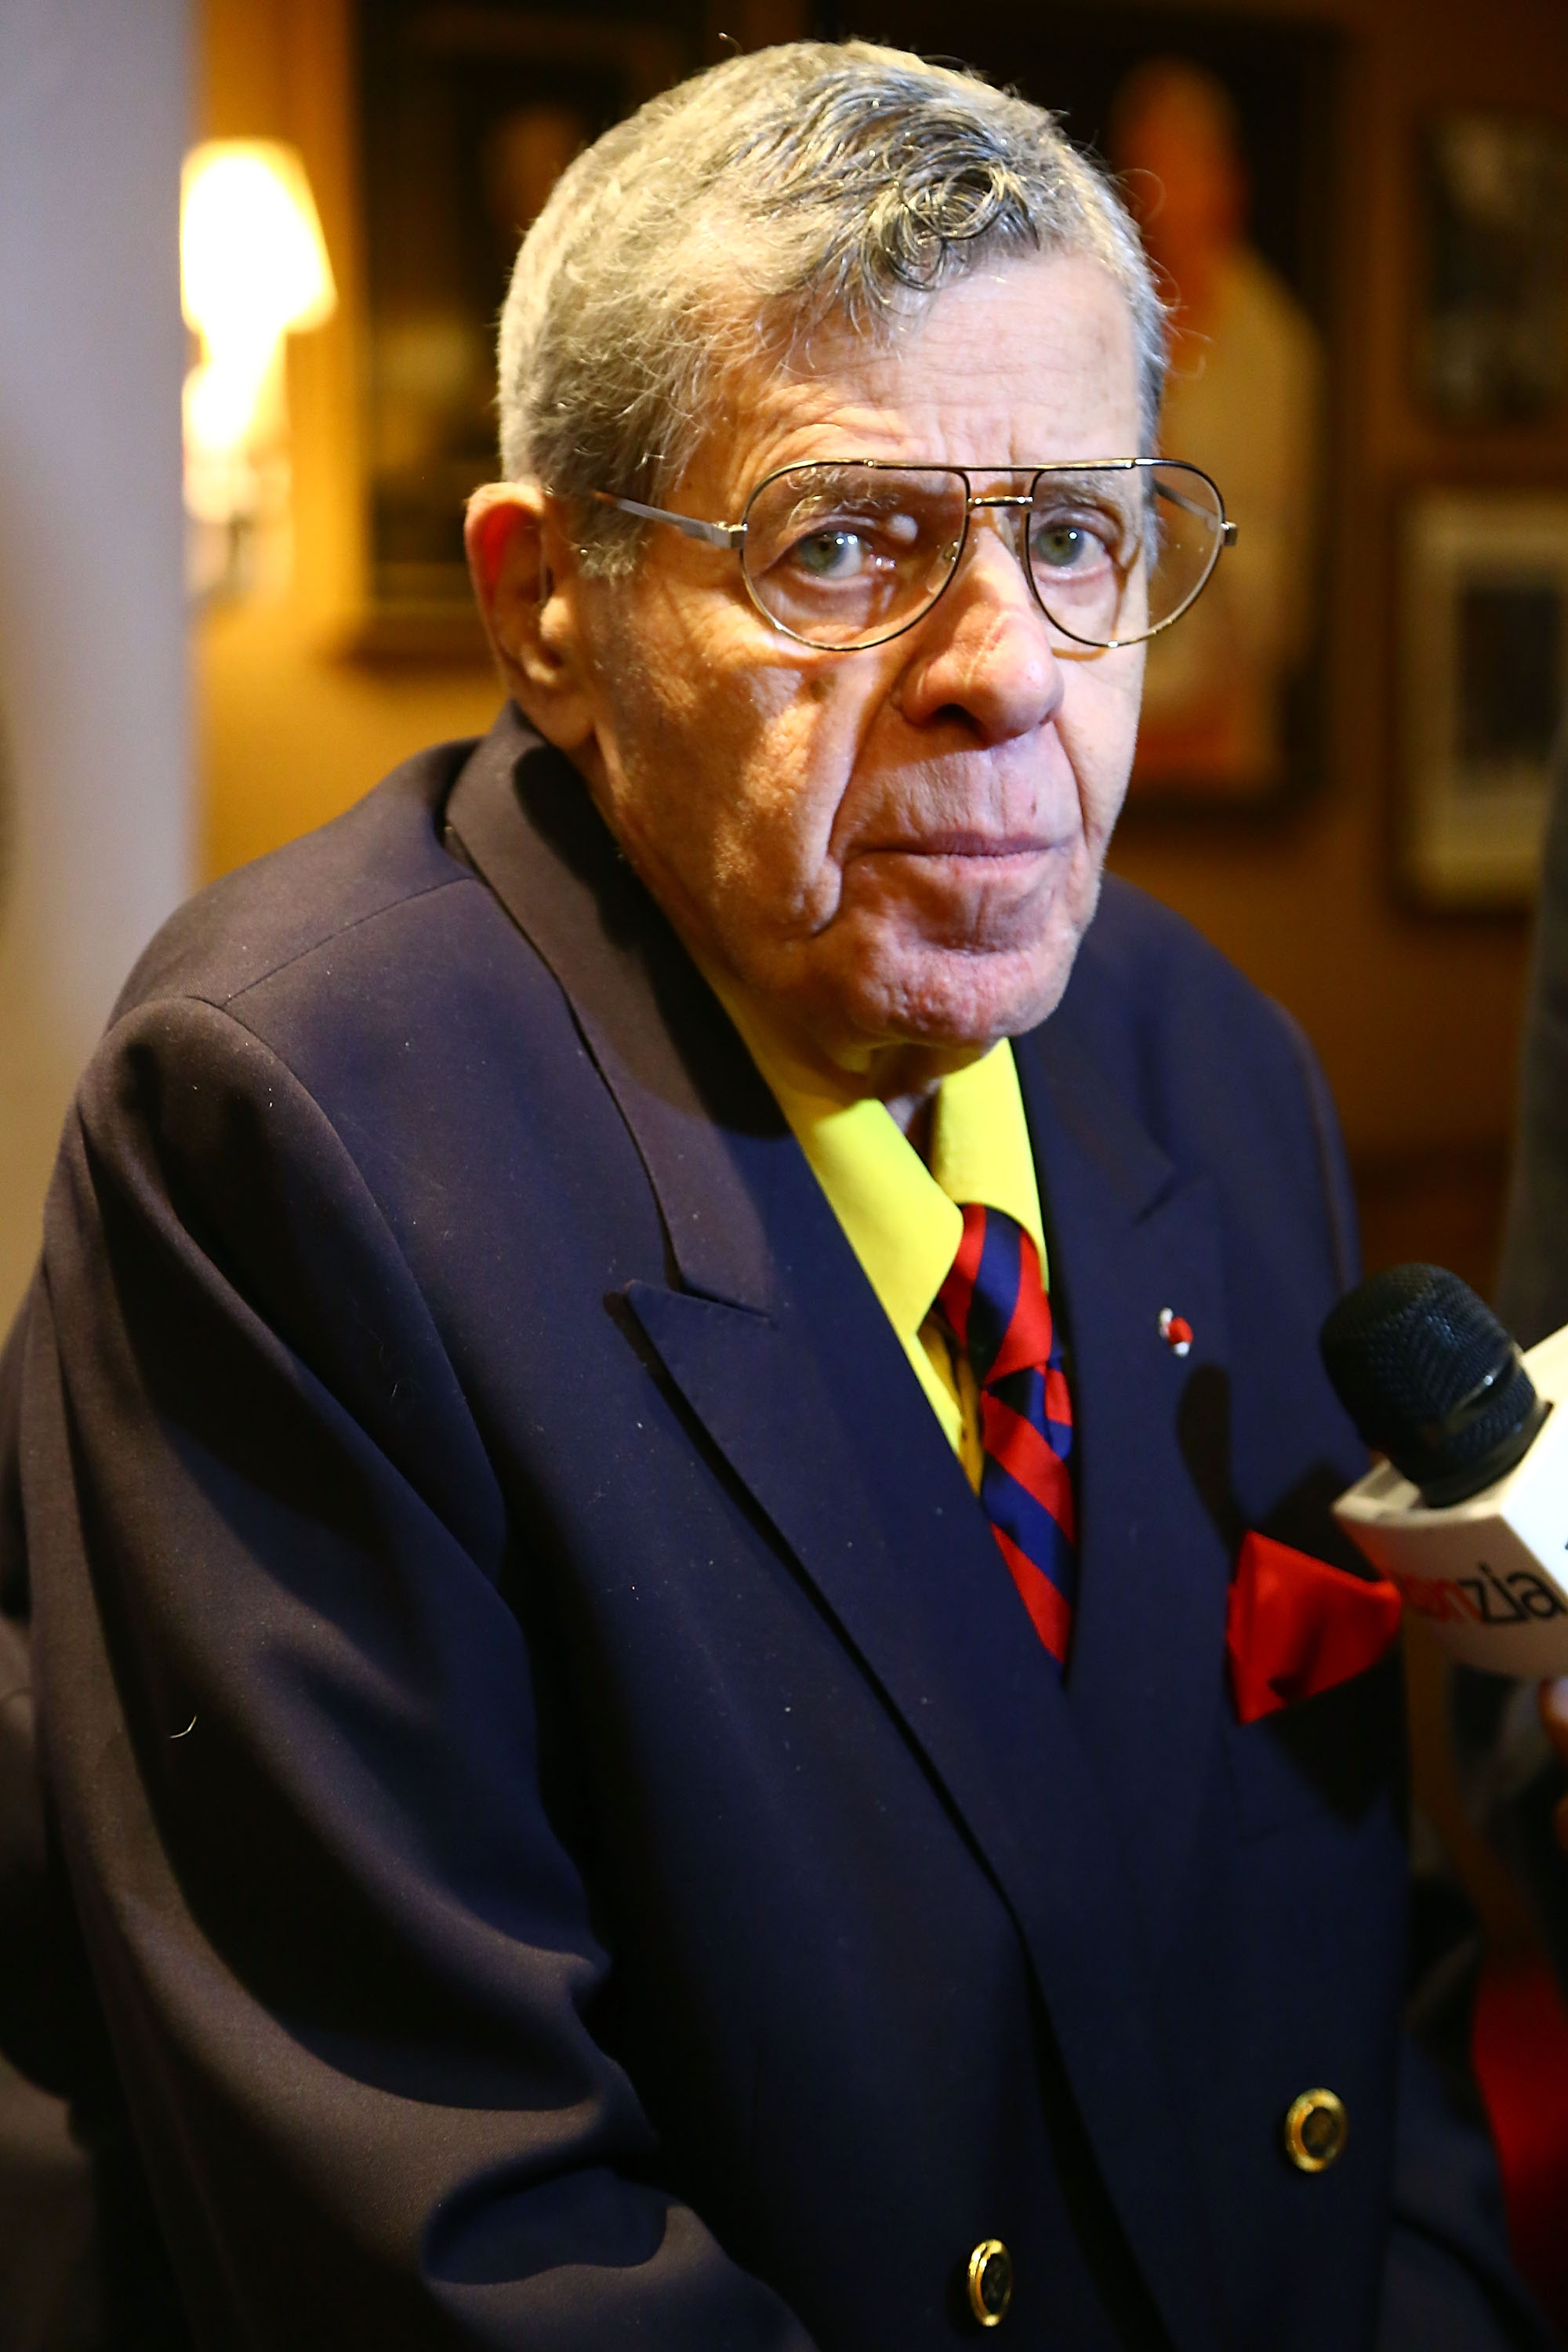 Jerry Lewis Dies at 91 Years Old, Stars Mourn His Death